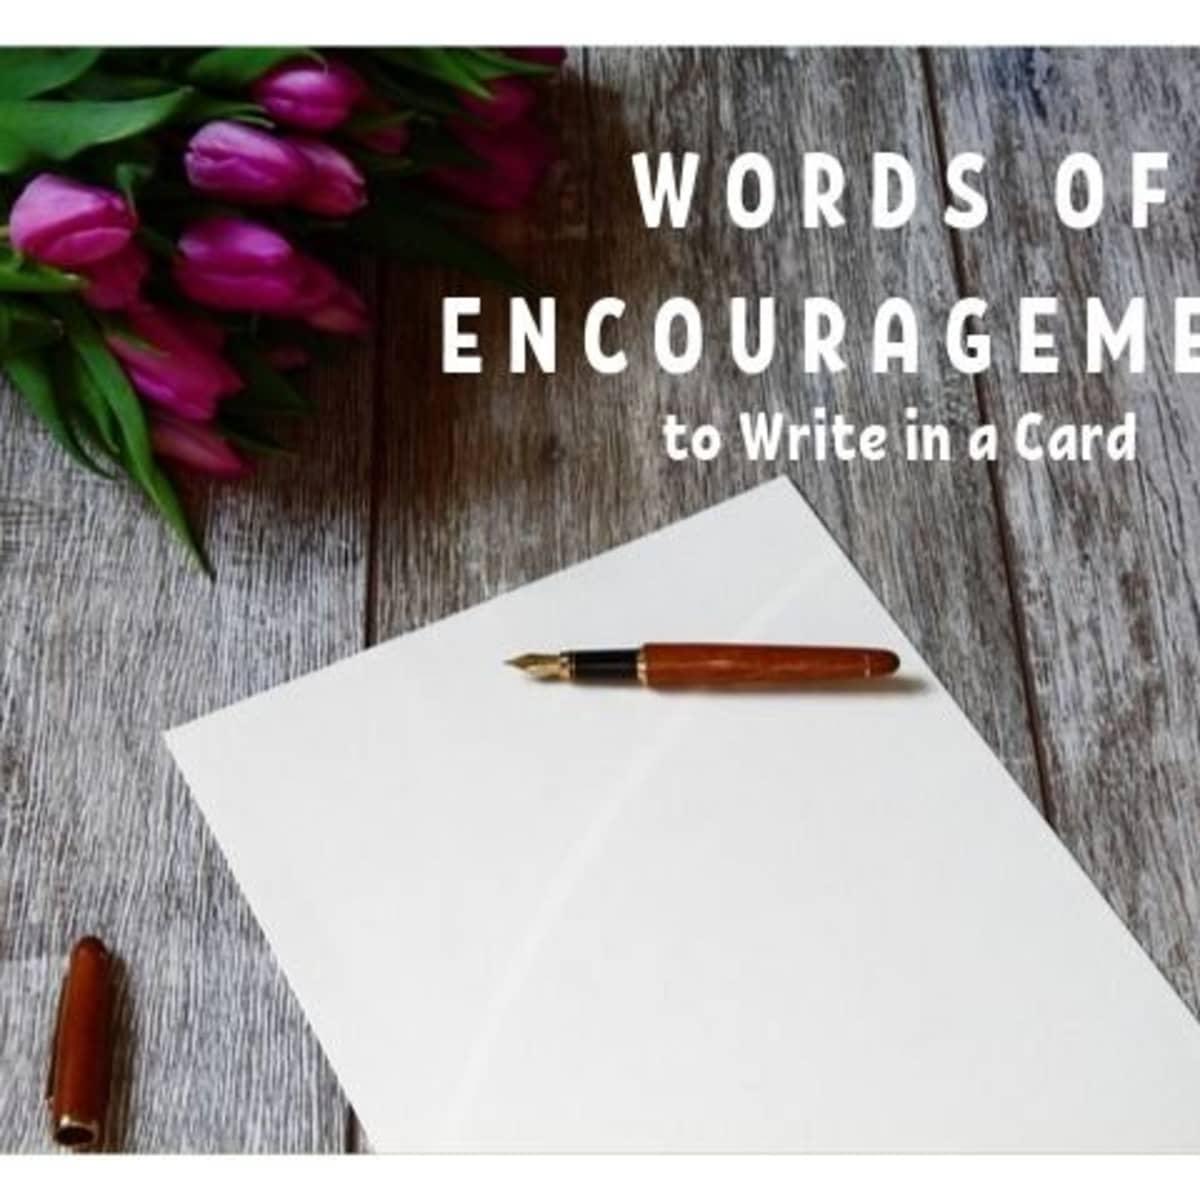 What Should I Write in a Card or Note of Encouragement? - Holidappy